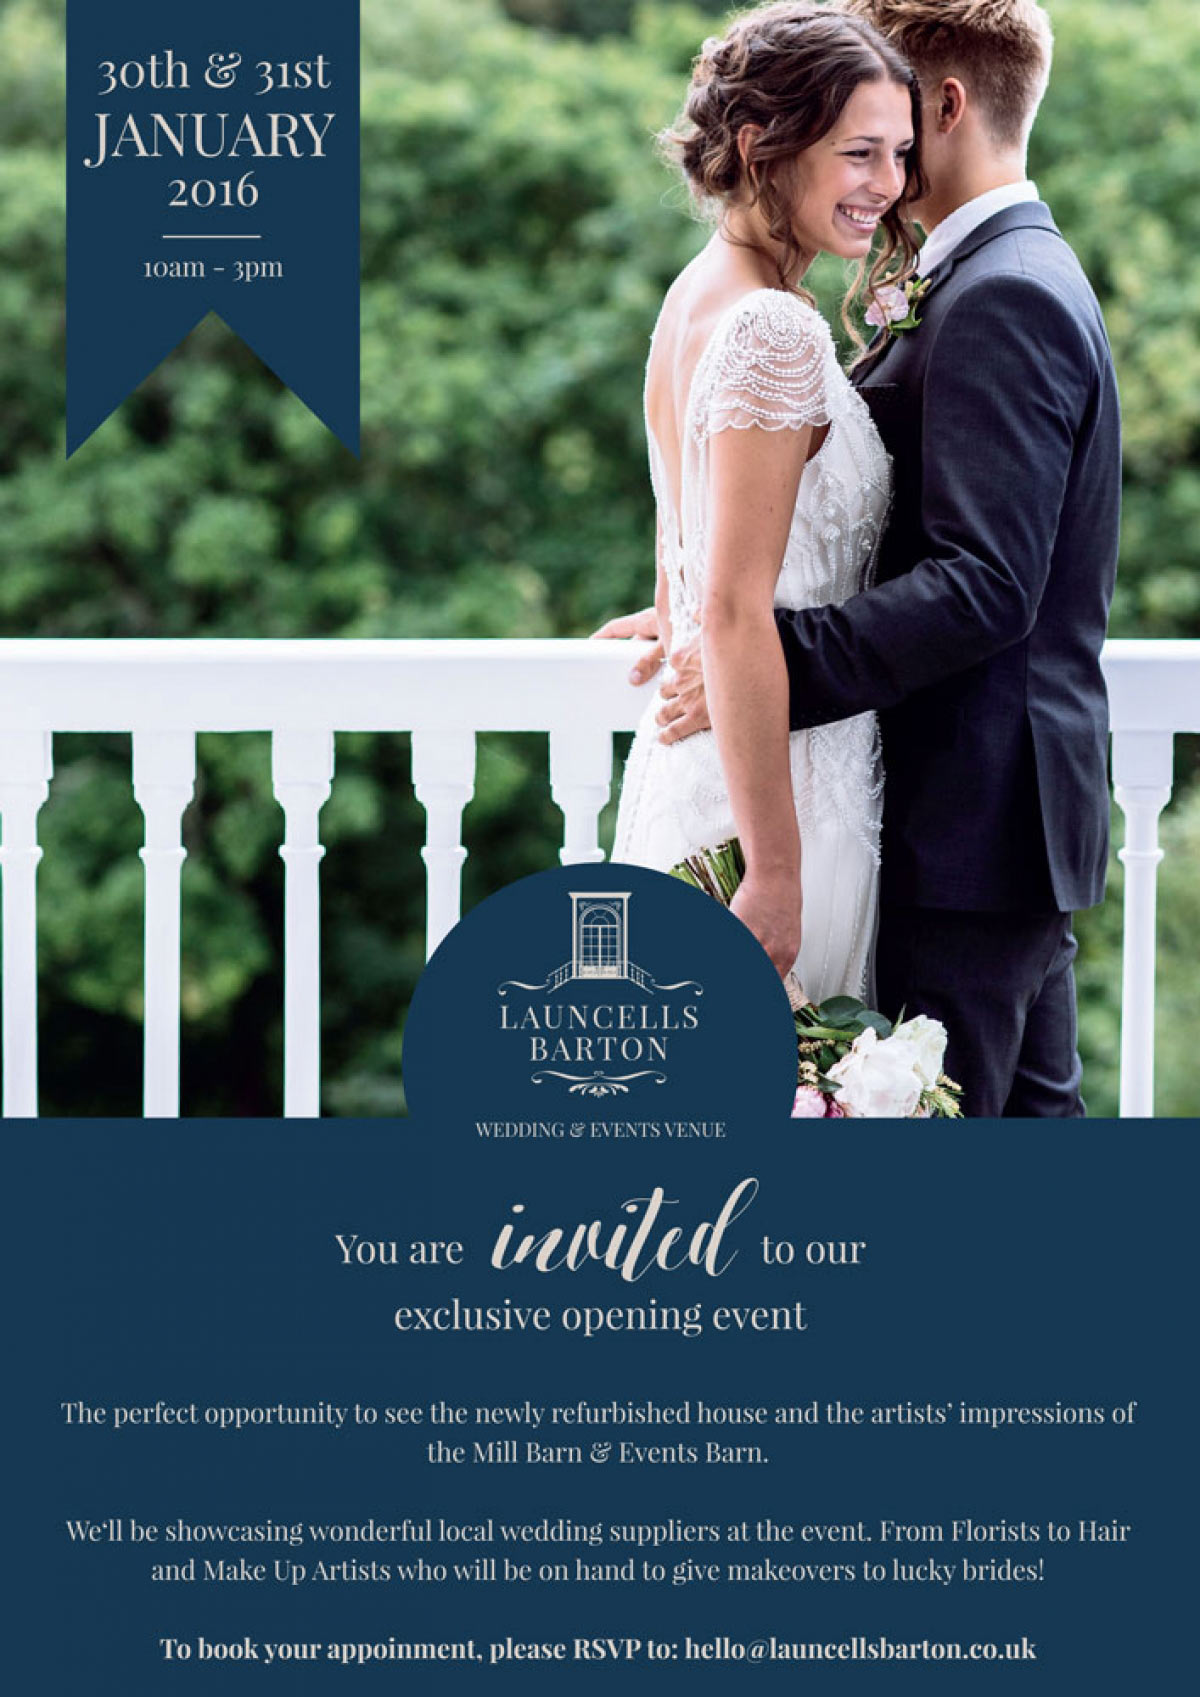 Exclusive Opening Event at Launcells Barton